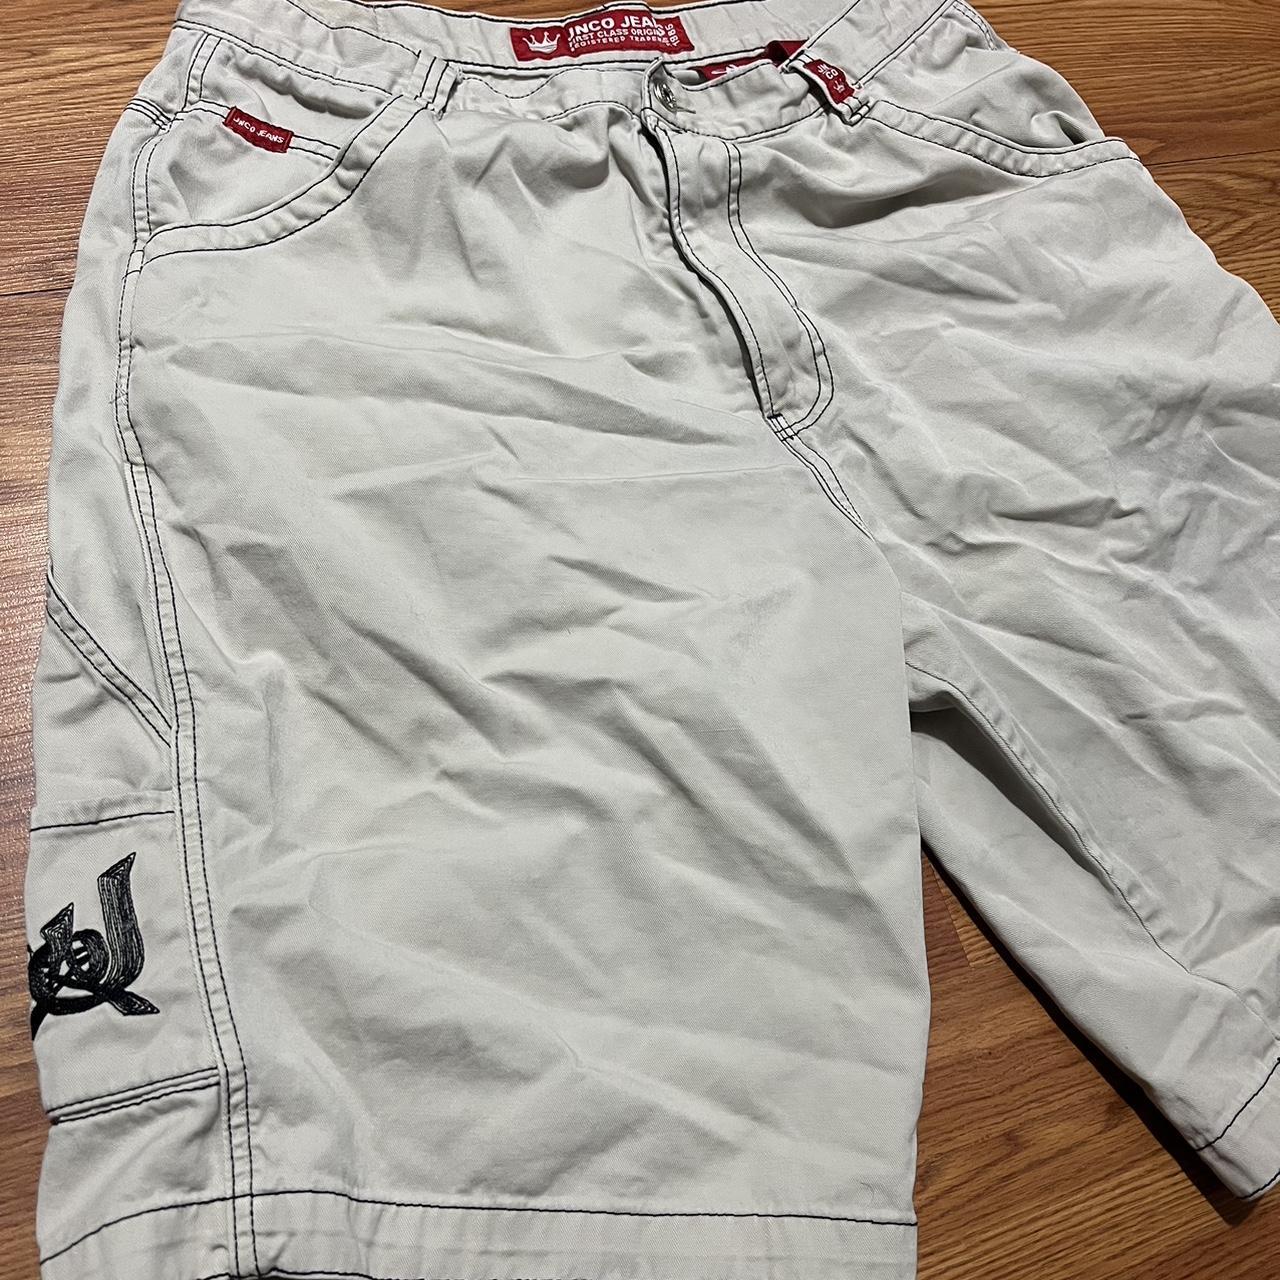 Jnco shorts Embroidered back pocket with spell out... - Depop